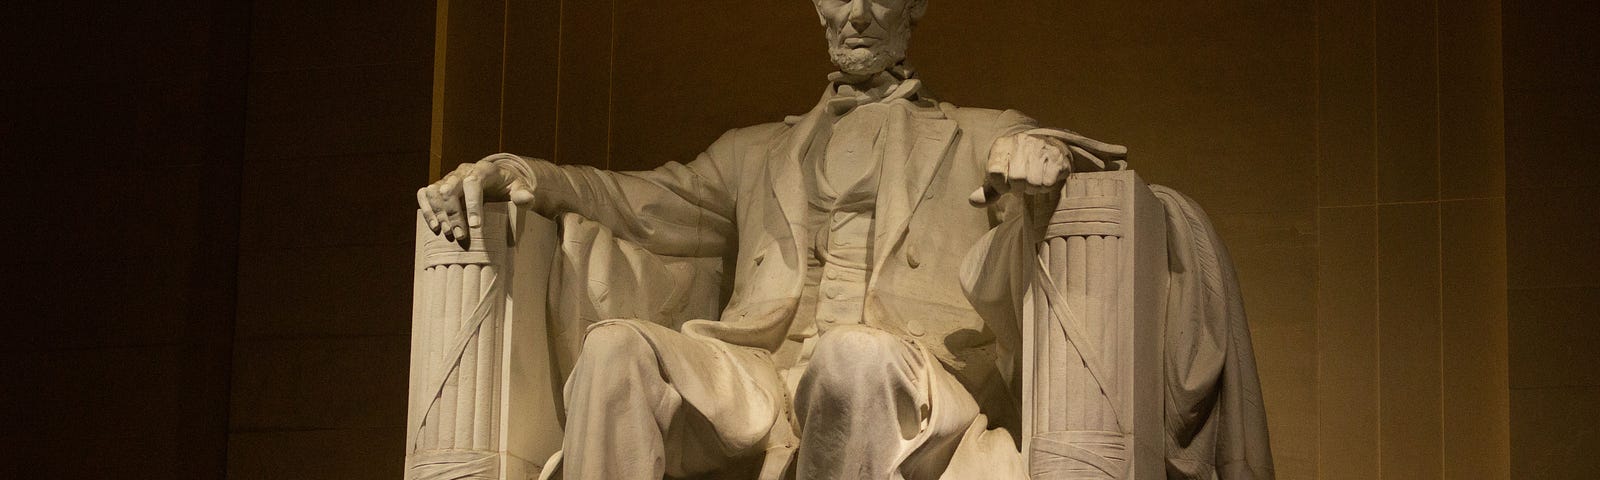 The statue of Lincoln sitting in a chair inside the Lincoln memorial